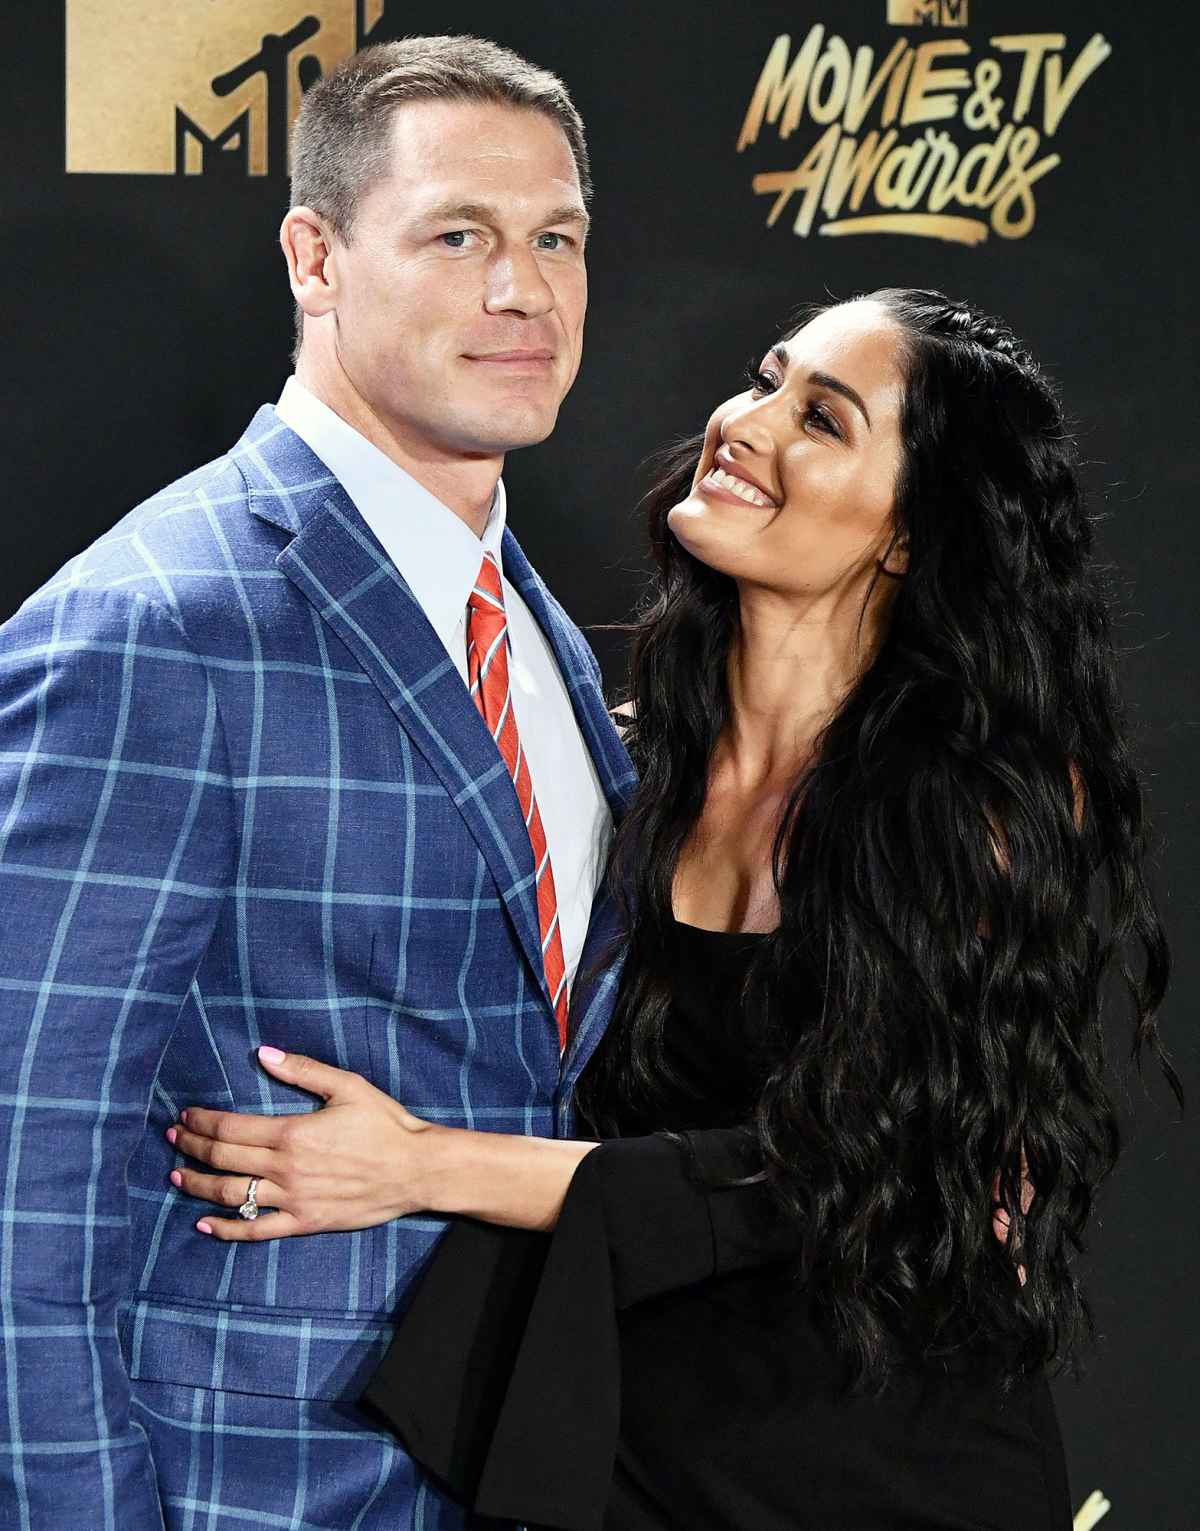 Nikki Bella's Ex-Husband: 5 Fast Facts You Need to Know